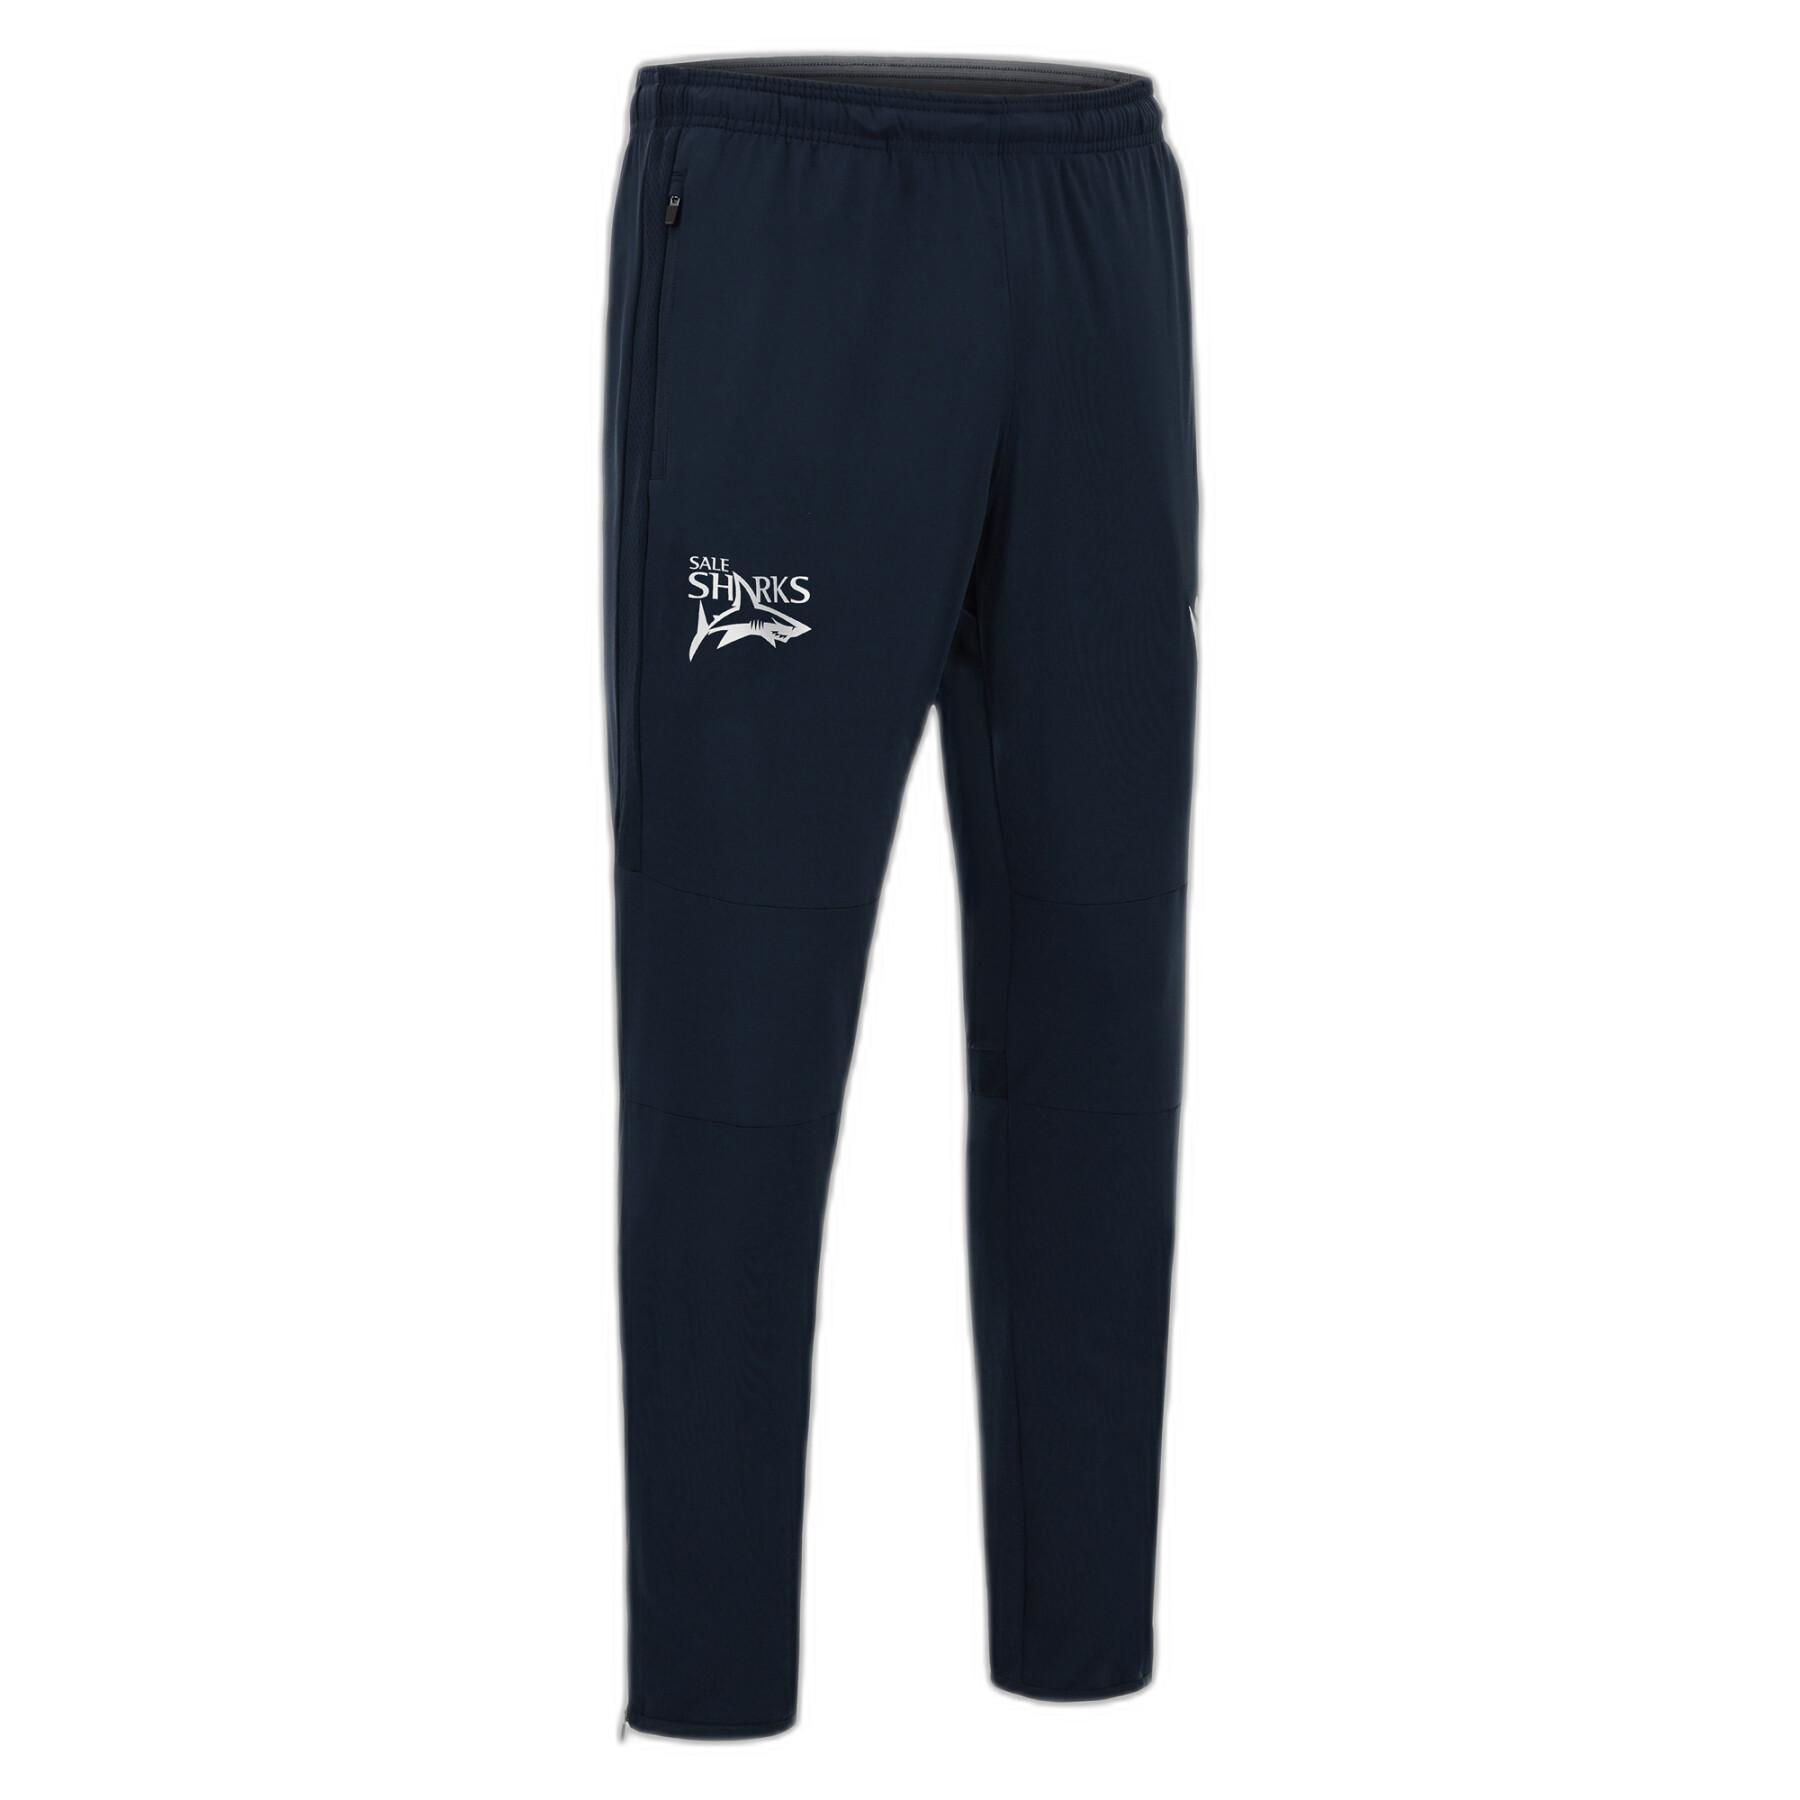 Fitted training pants Sale Sharks 2022/23